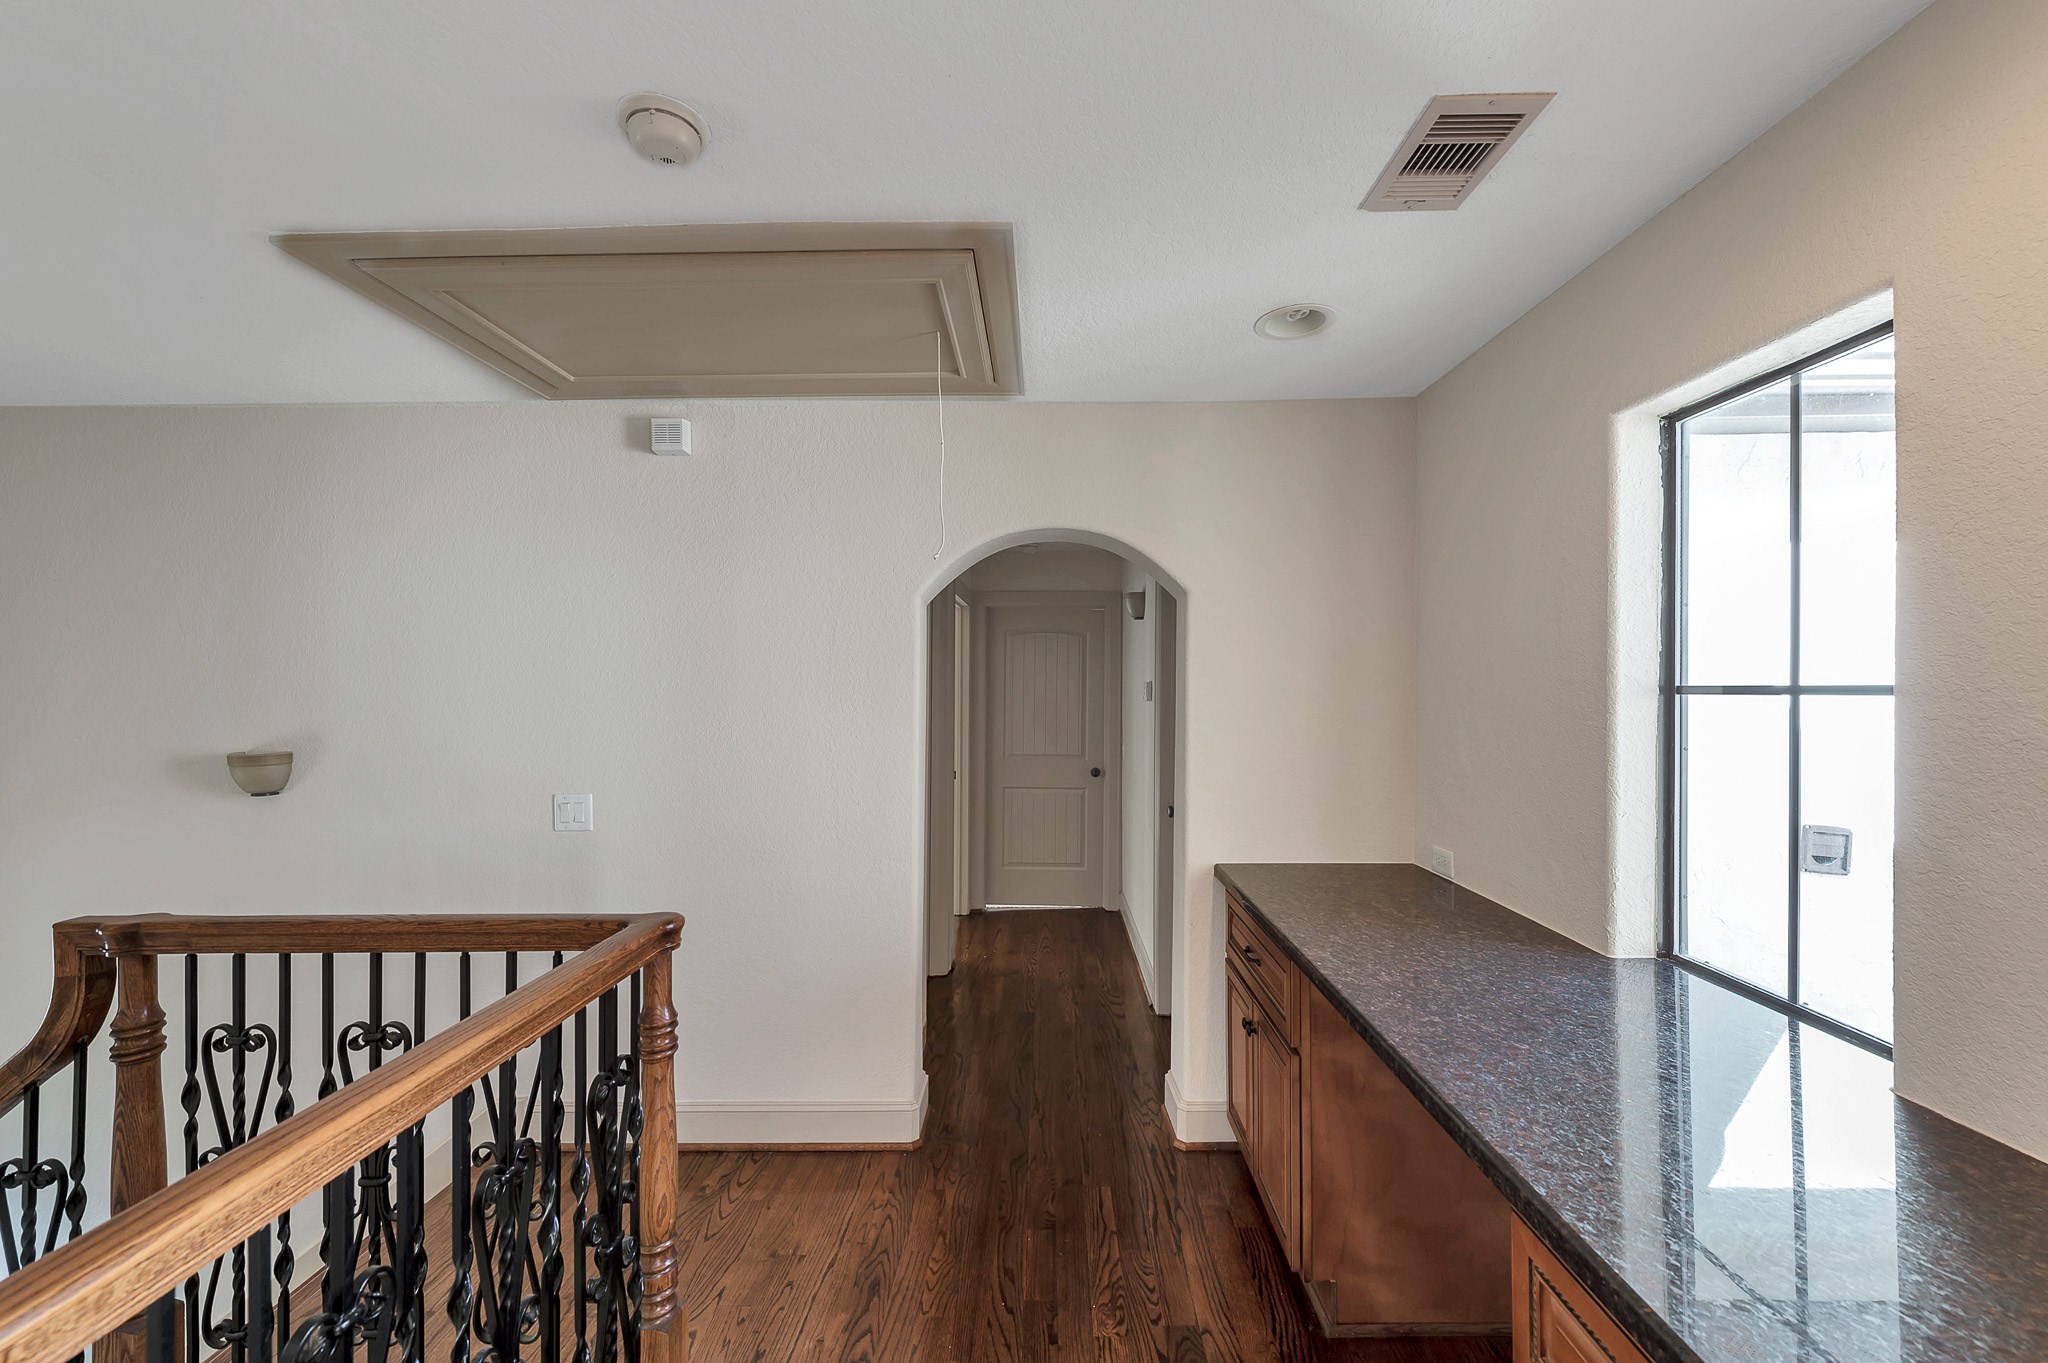 Attic access - If you have additional questions regarding 1802 W 25th Street  in Houston or would like to tour the property with us call 800-660-1022 and reference MLS# 40510928.